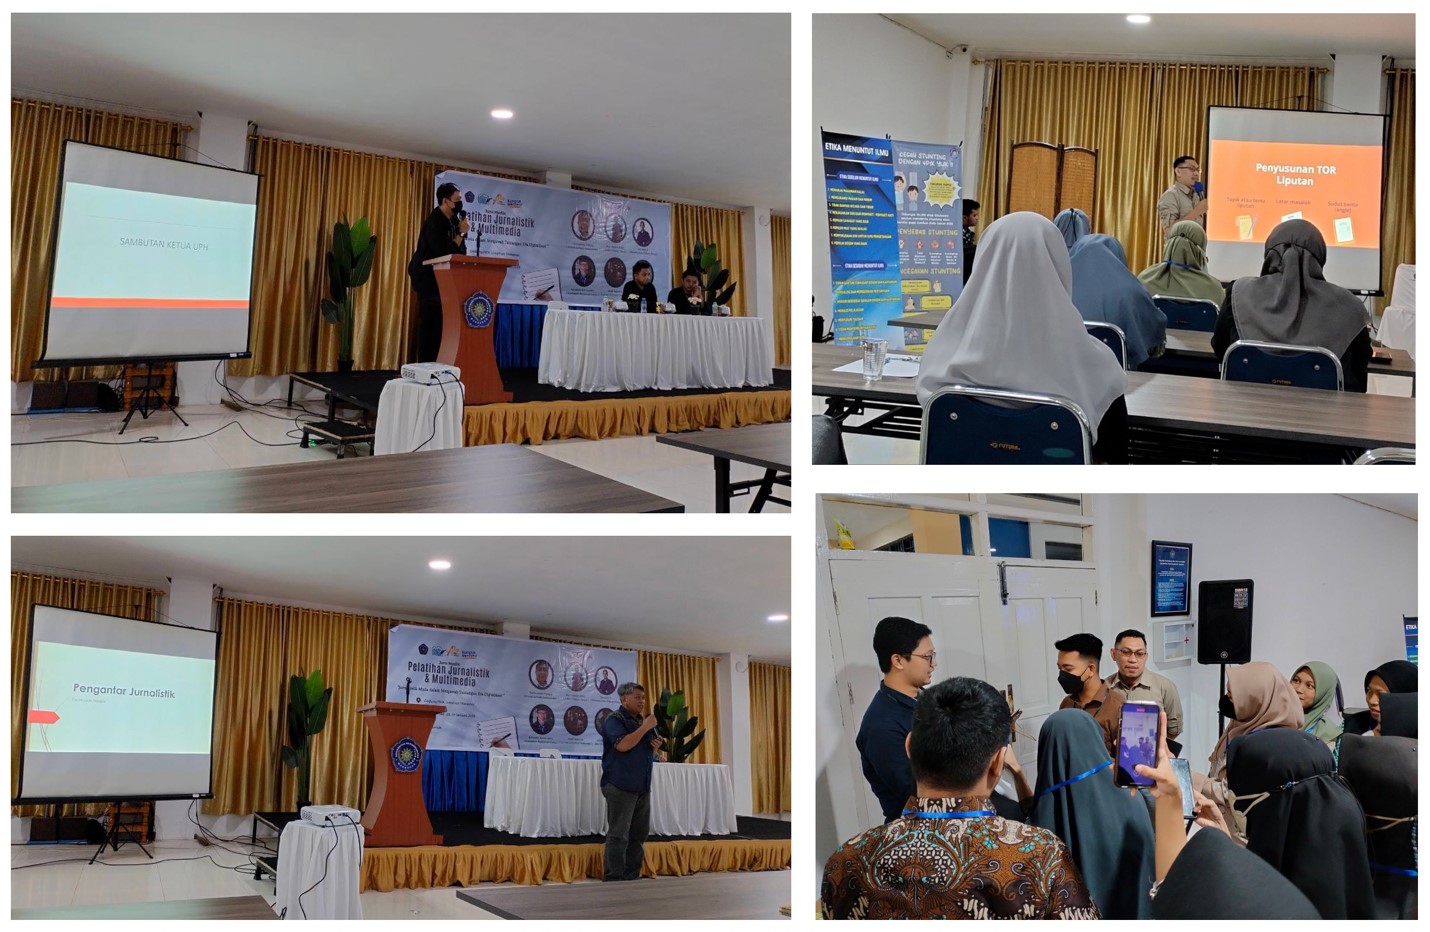 PIONEERING STUDENT PRESS ORGANIZATION, FKIK UNISMUH HOLDS JOURNALISM AND MULTIMEDIA TRAINING FOR STUDENTS